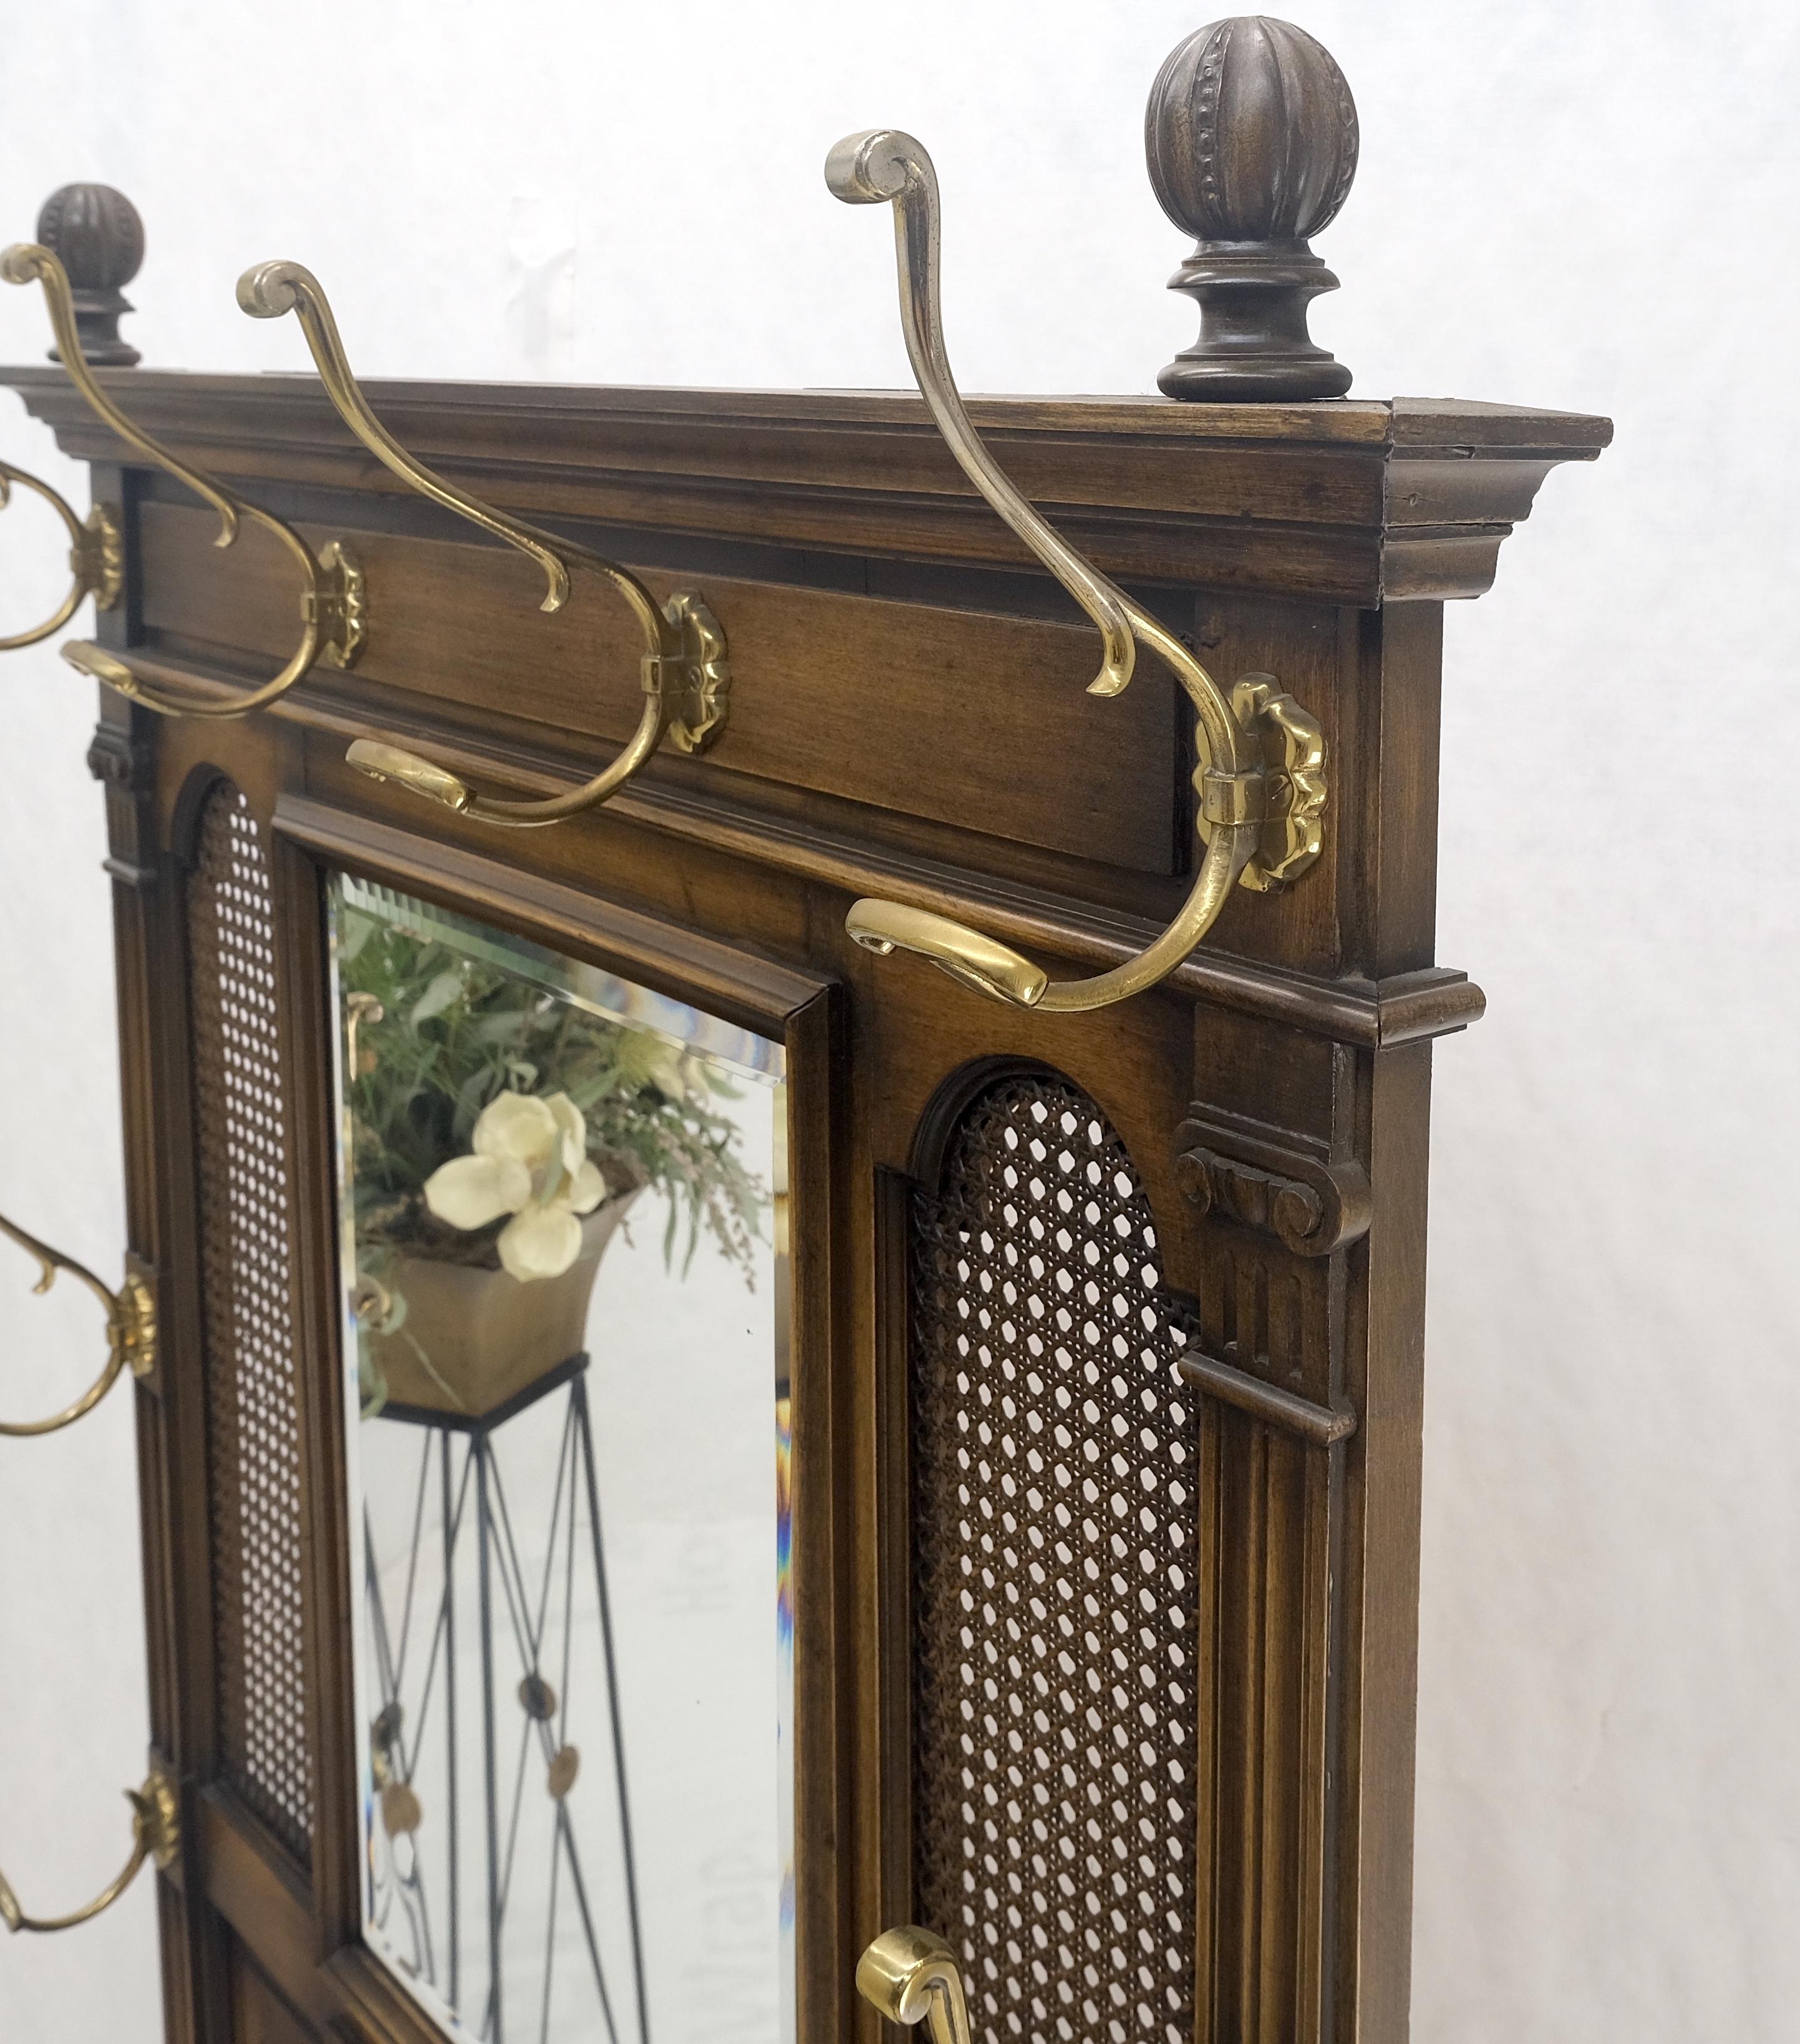 Carved Walnut Brass Cane Mirror Brass Hooks Coat Rack Umbrella Stand Console Table MINT!